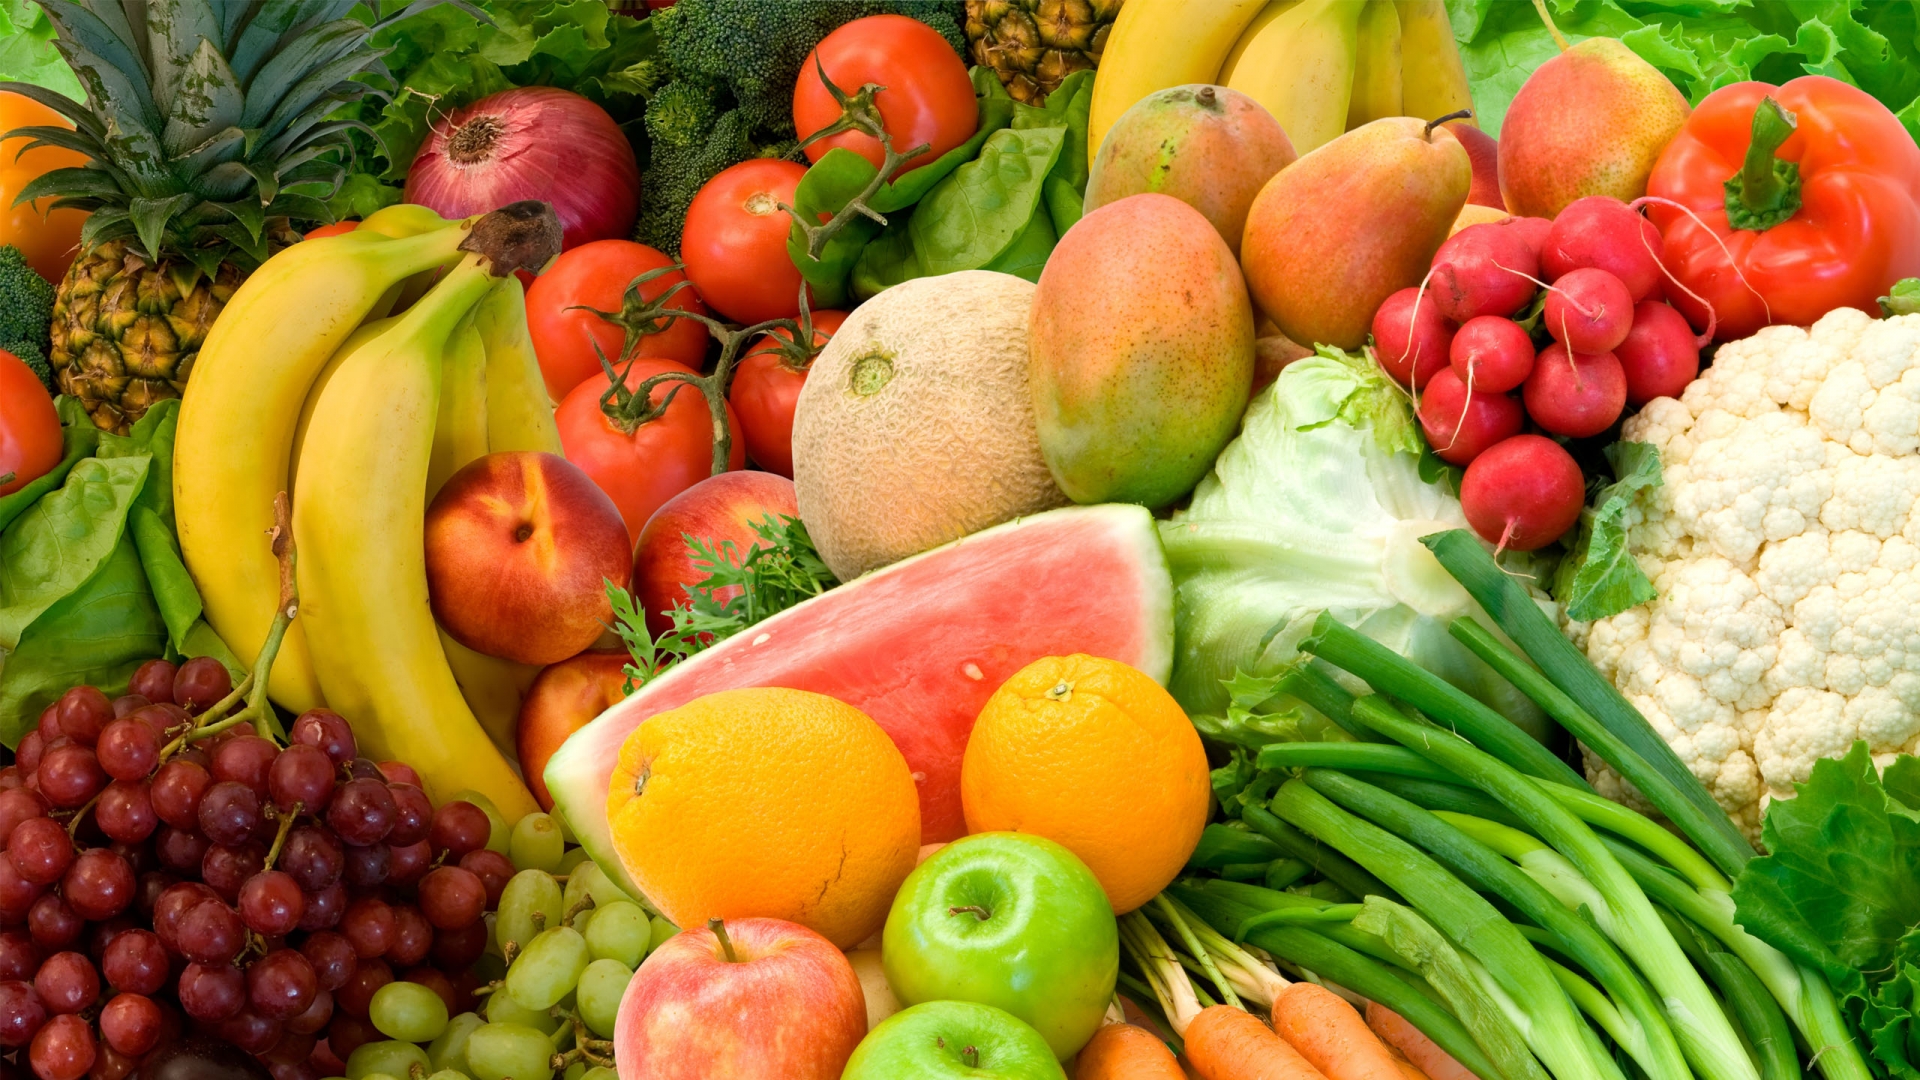 Fruits-and-vegetables-hd-wallpapers